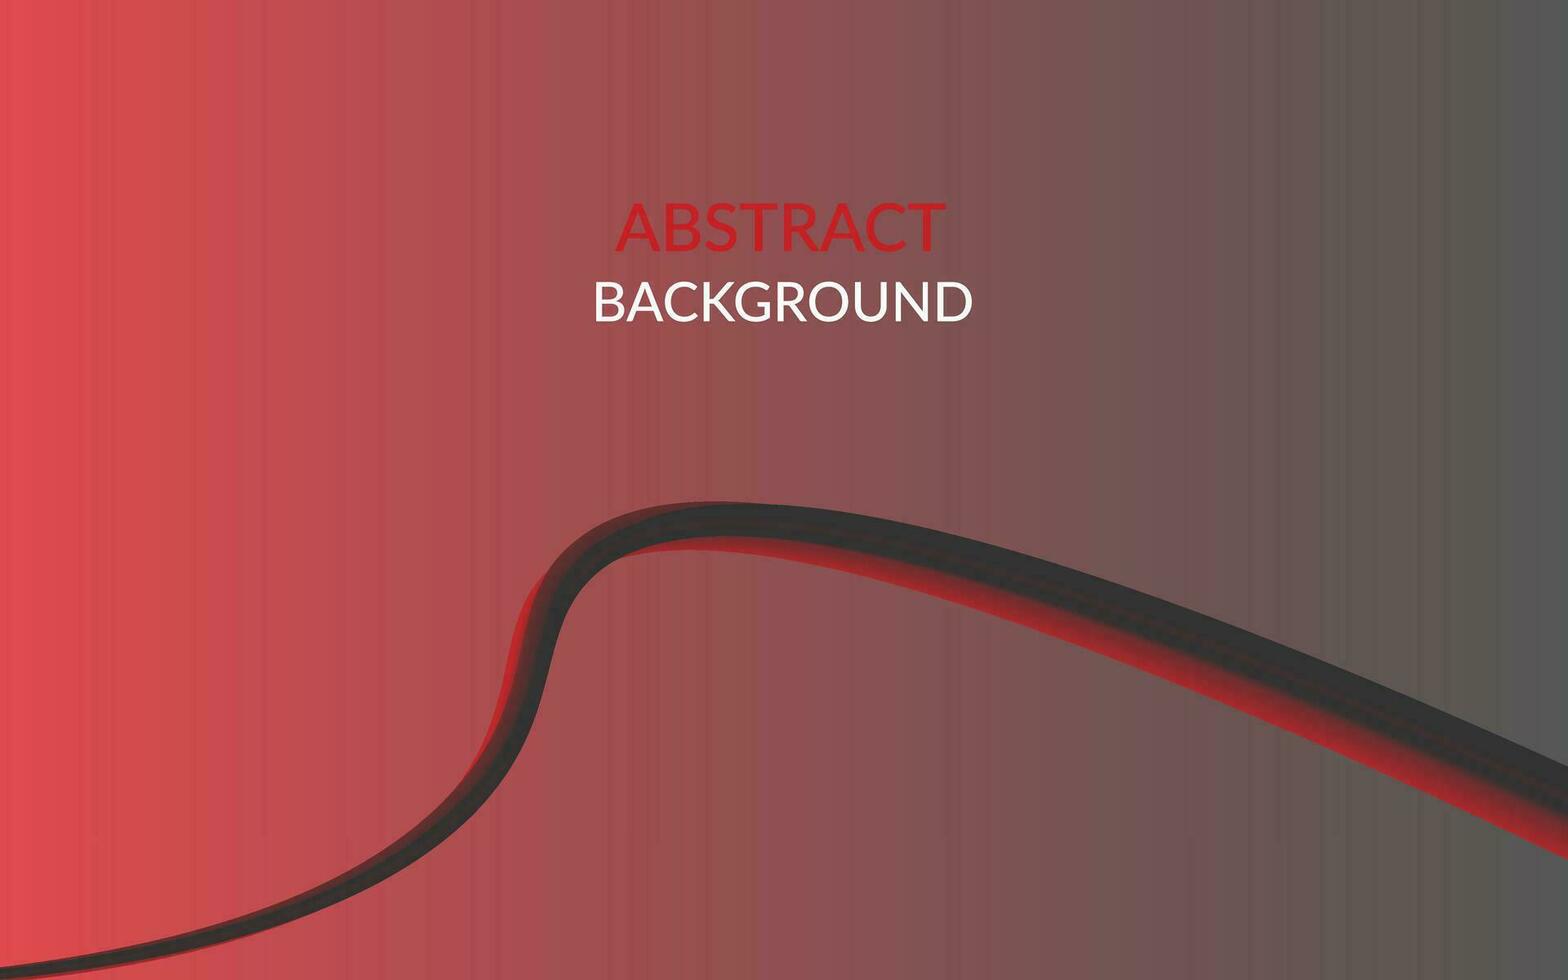 Abstract Backgound design,colorful wavy background design with geometric and gradient shapes.Red color background design.Suit for poster,cover,banner,brochure,website vector